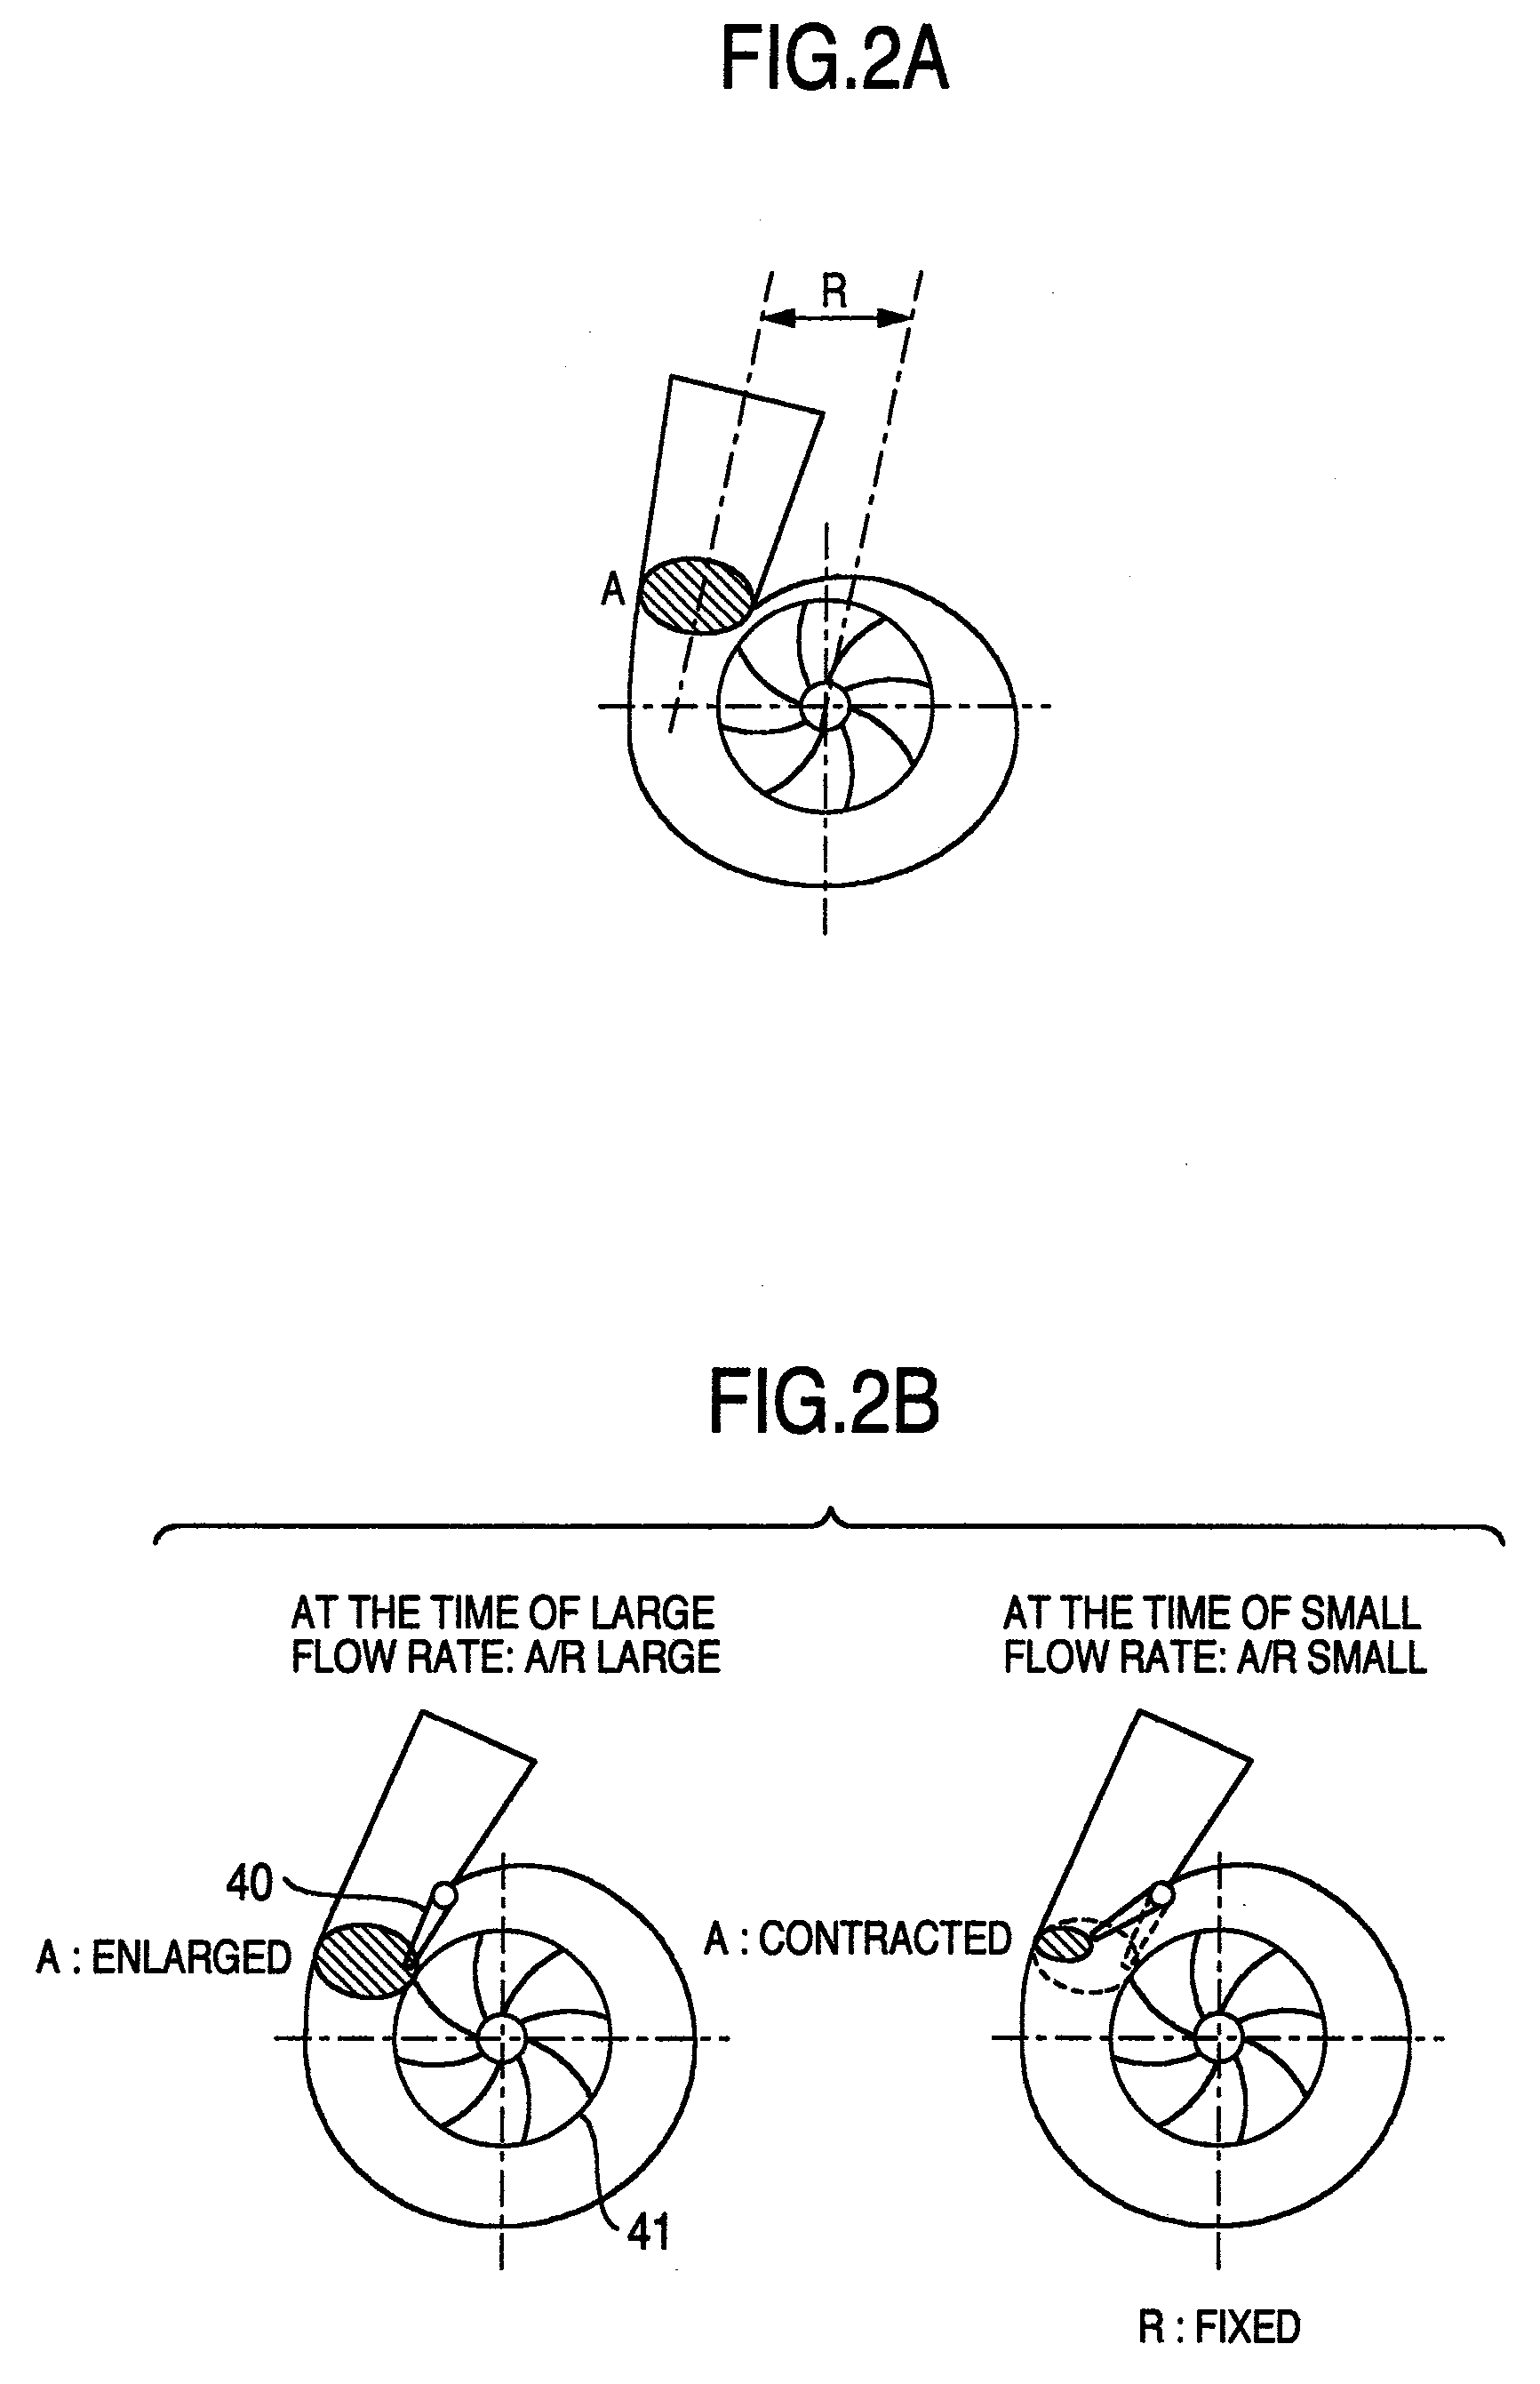 Method and apparatus for controlling an internal combustion engine